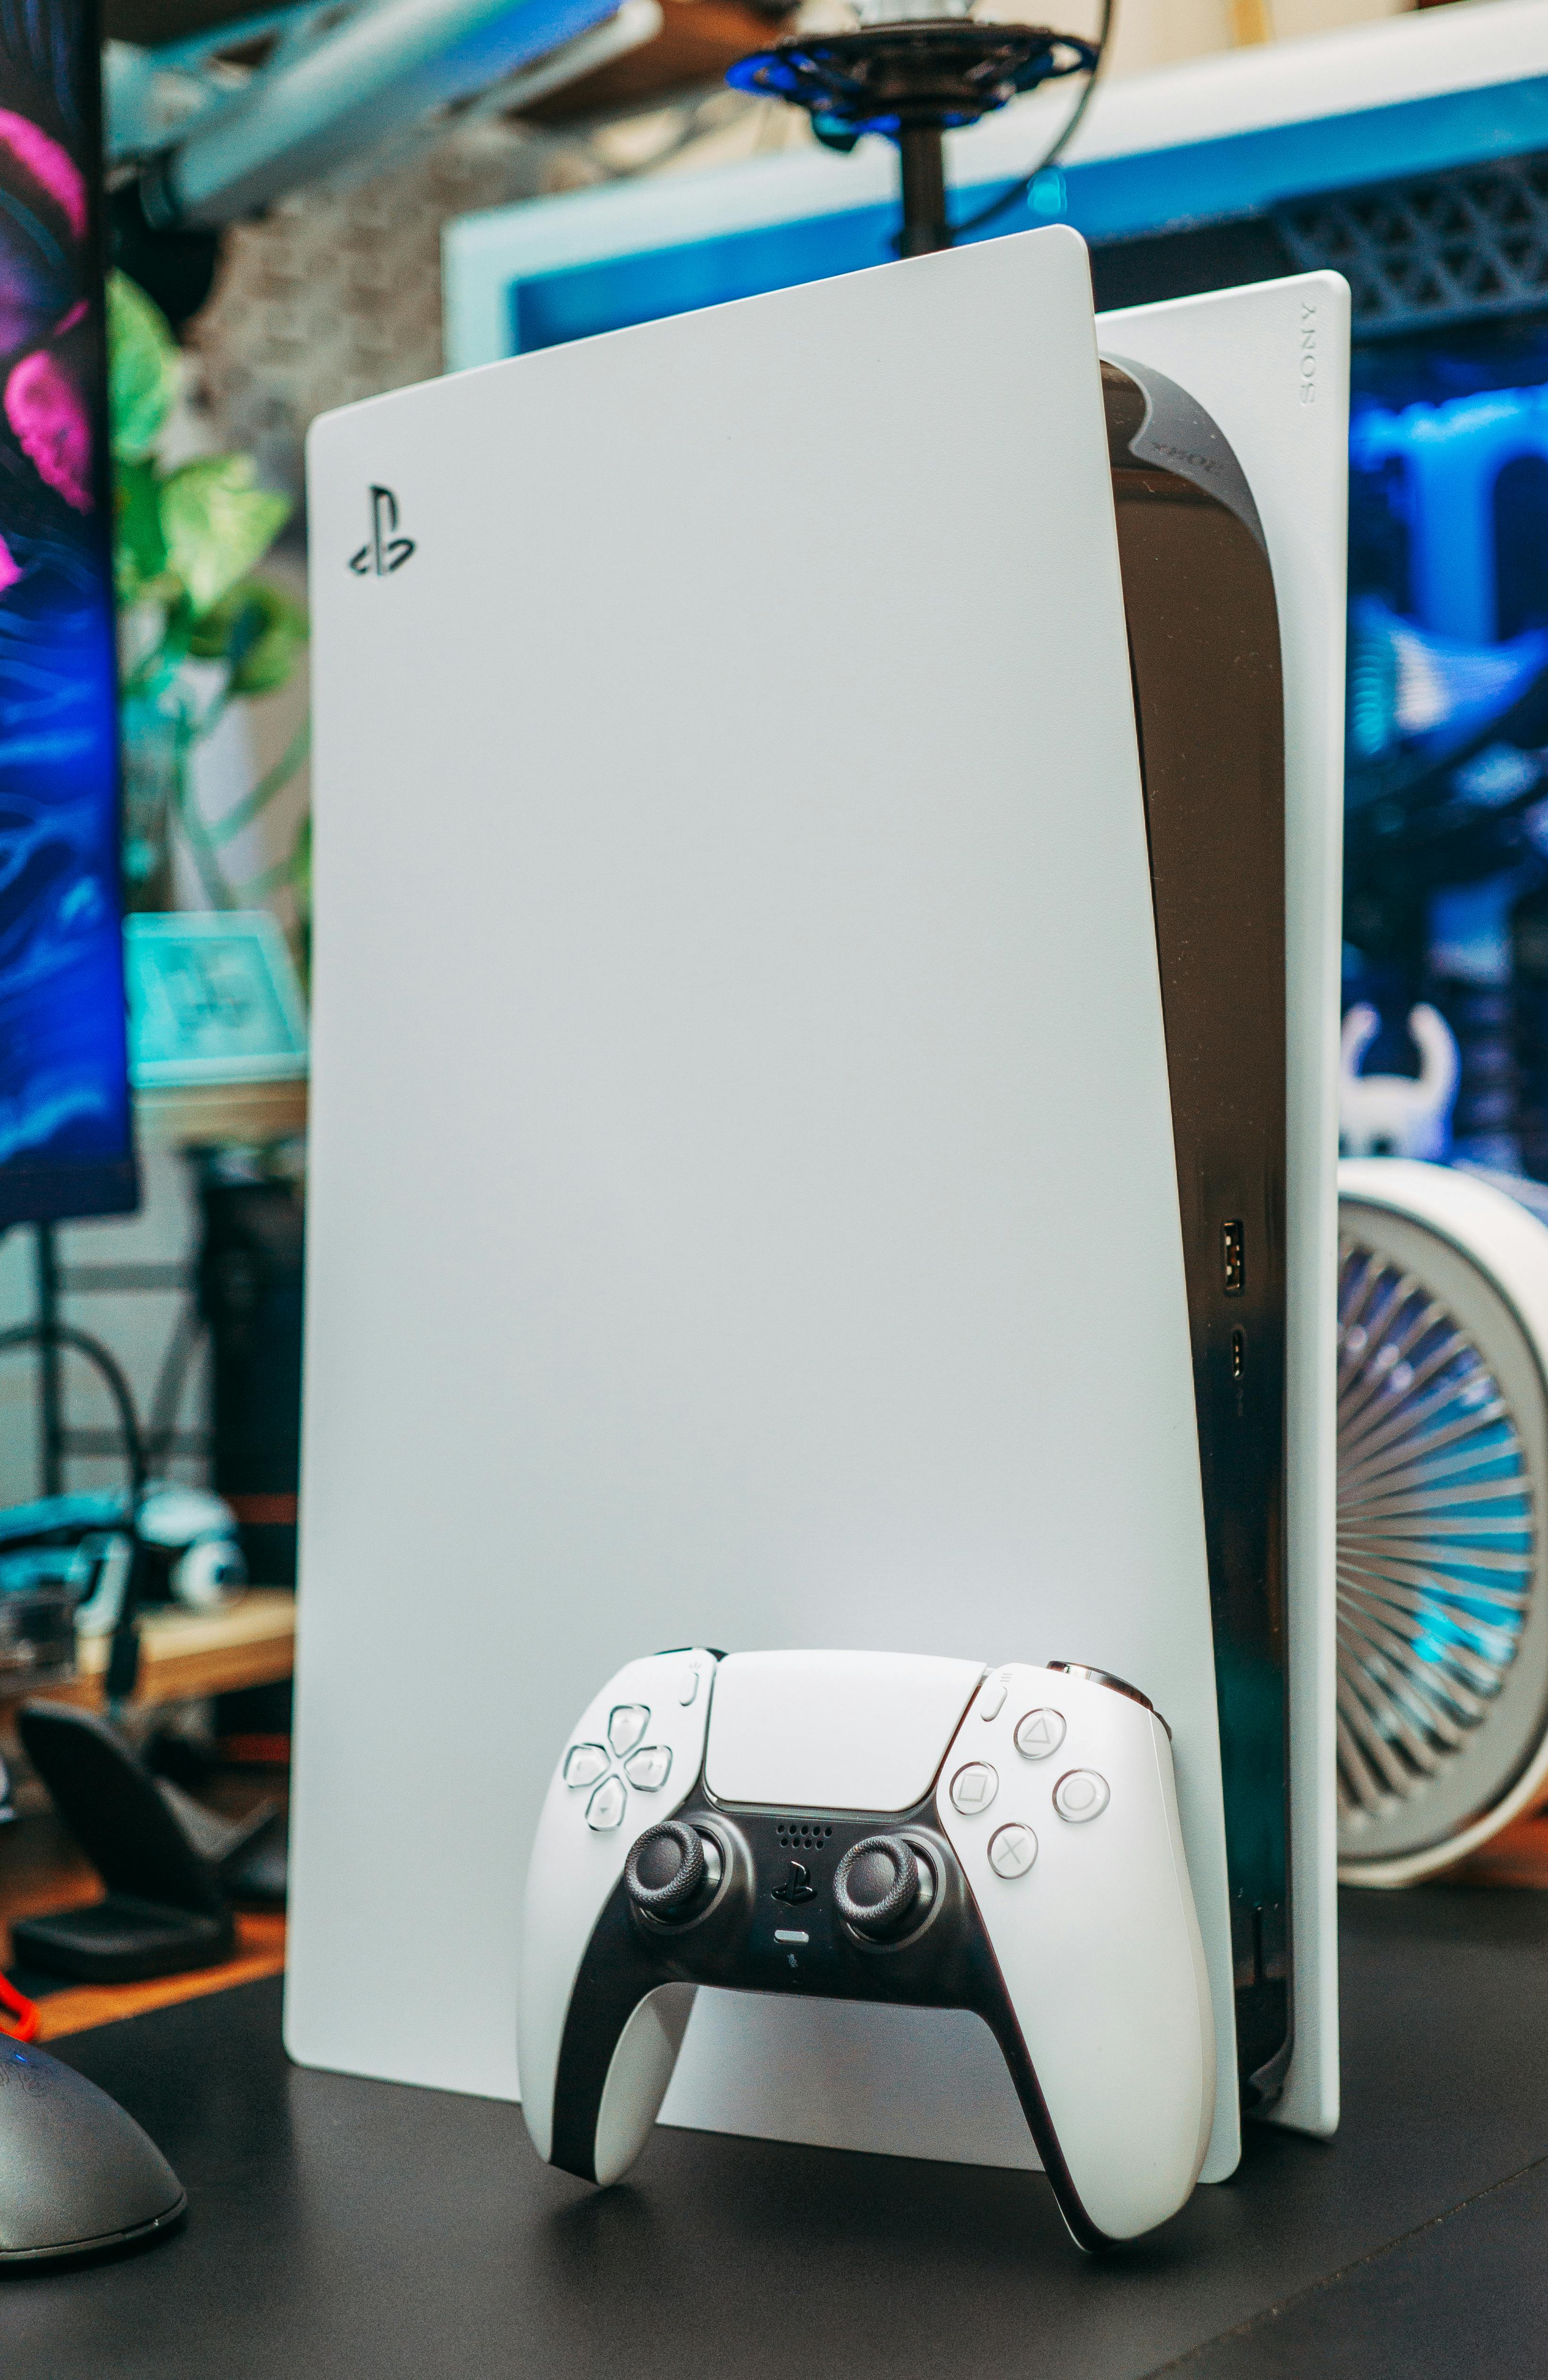 A PlayStation console with gaming controller | Source: Pexels